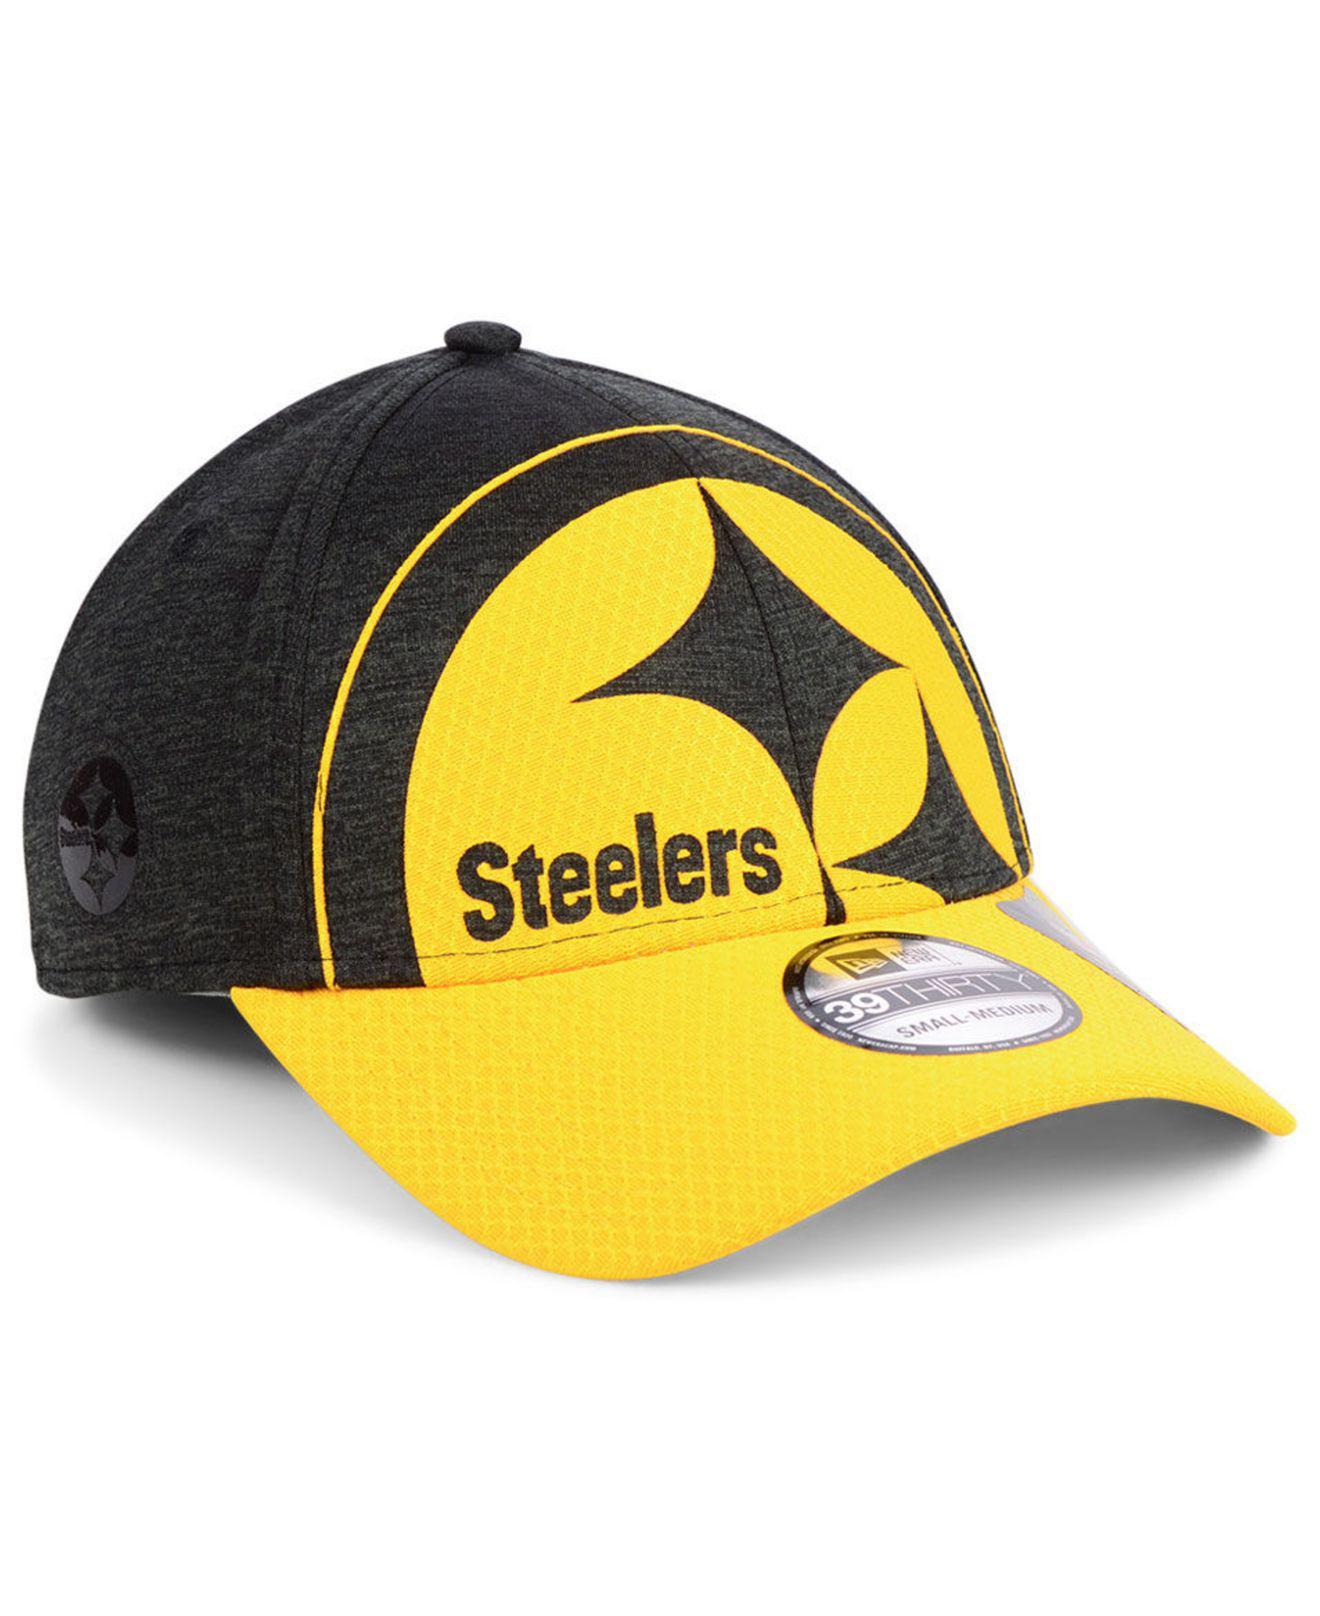 Black and Yellow Steelers Logo - Lyst Pittsburgh Steelers Oversized Laser Cut Logo 39thirty Cap